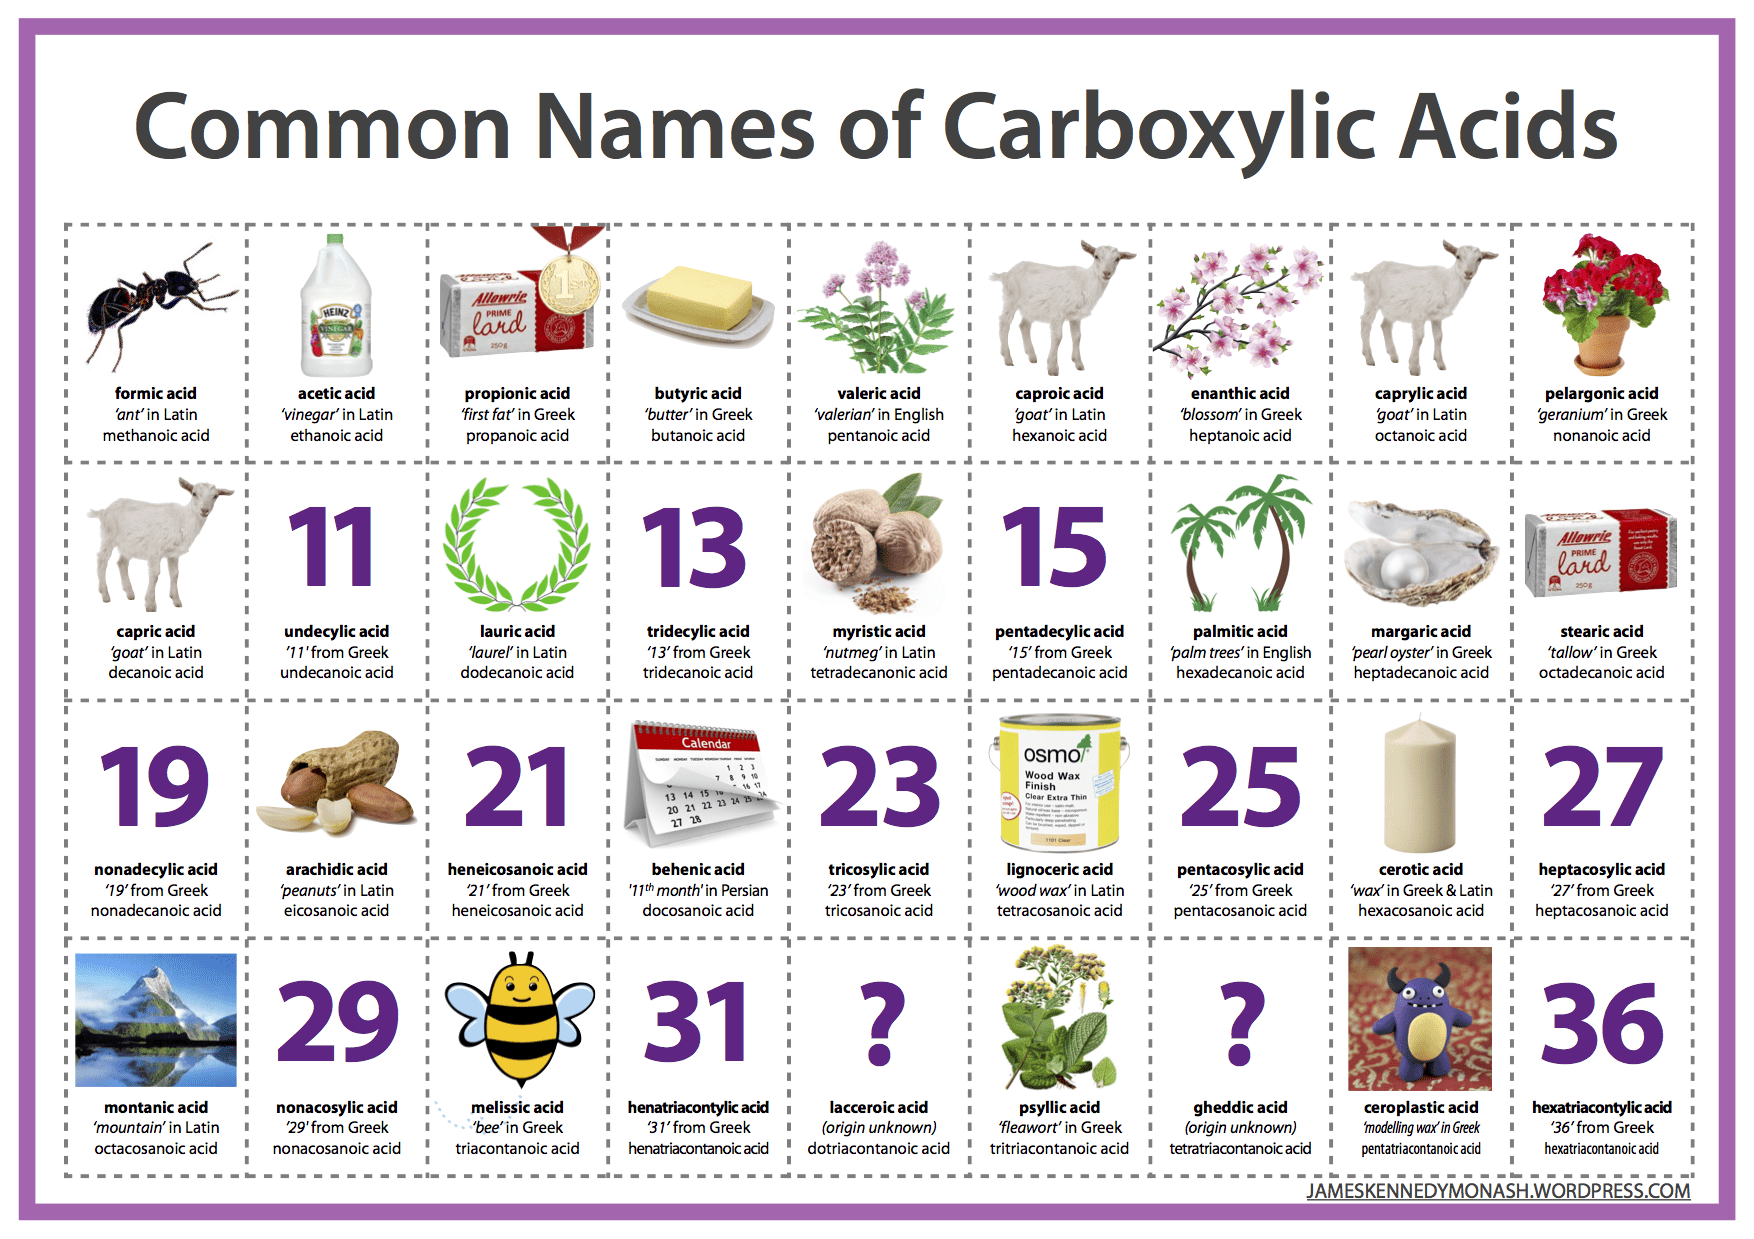 common-names-of-carboxylic-acids.png